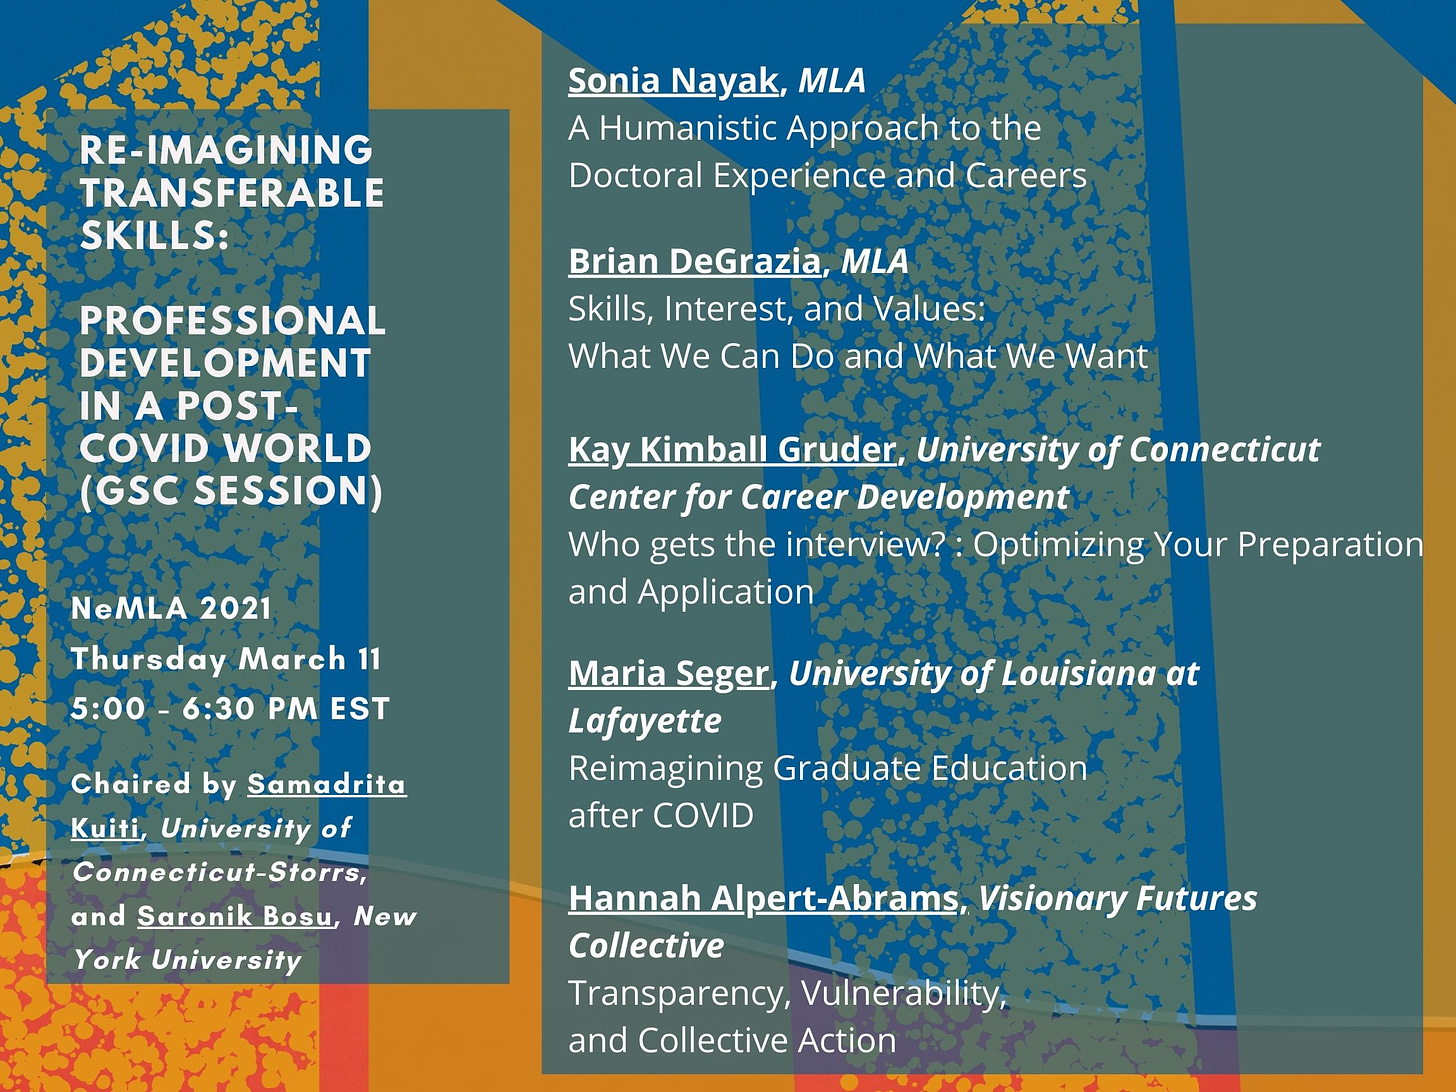 Advertisement for a conference panel: Reimagining Transferable Skills: Professional Development in a Post-Covid world. NeMLA 2021, Thursday March 11, 5-6:30pm est. Chaired by Samadrita Kuiti, University of Connecticut-Storrs, and Saronik Bosu, New York University. Text is overlaid on a beautiful orange, blue, and red design.